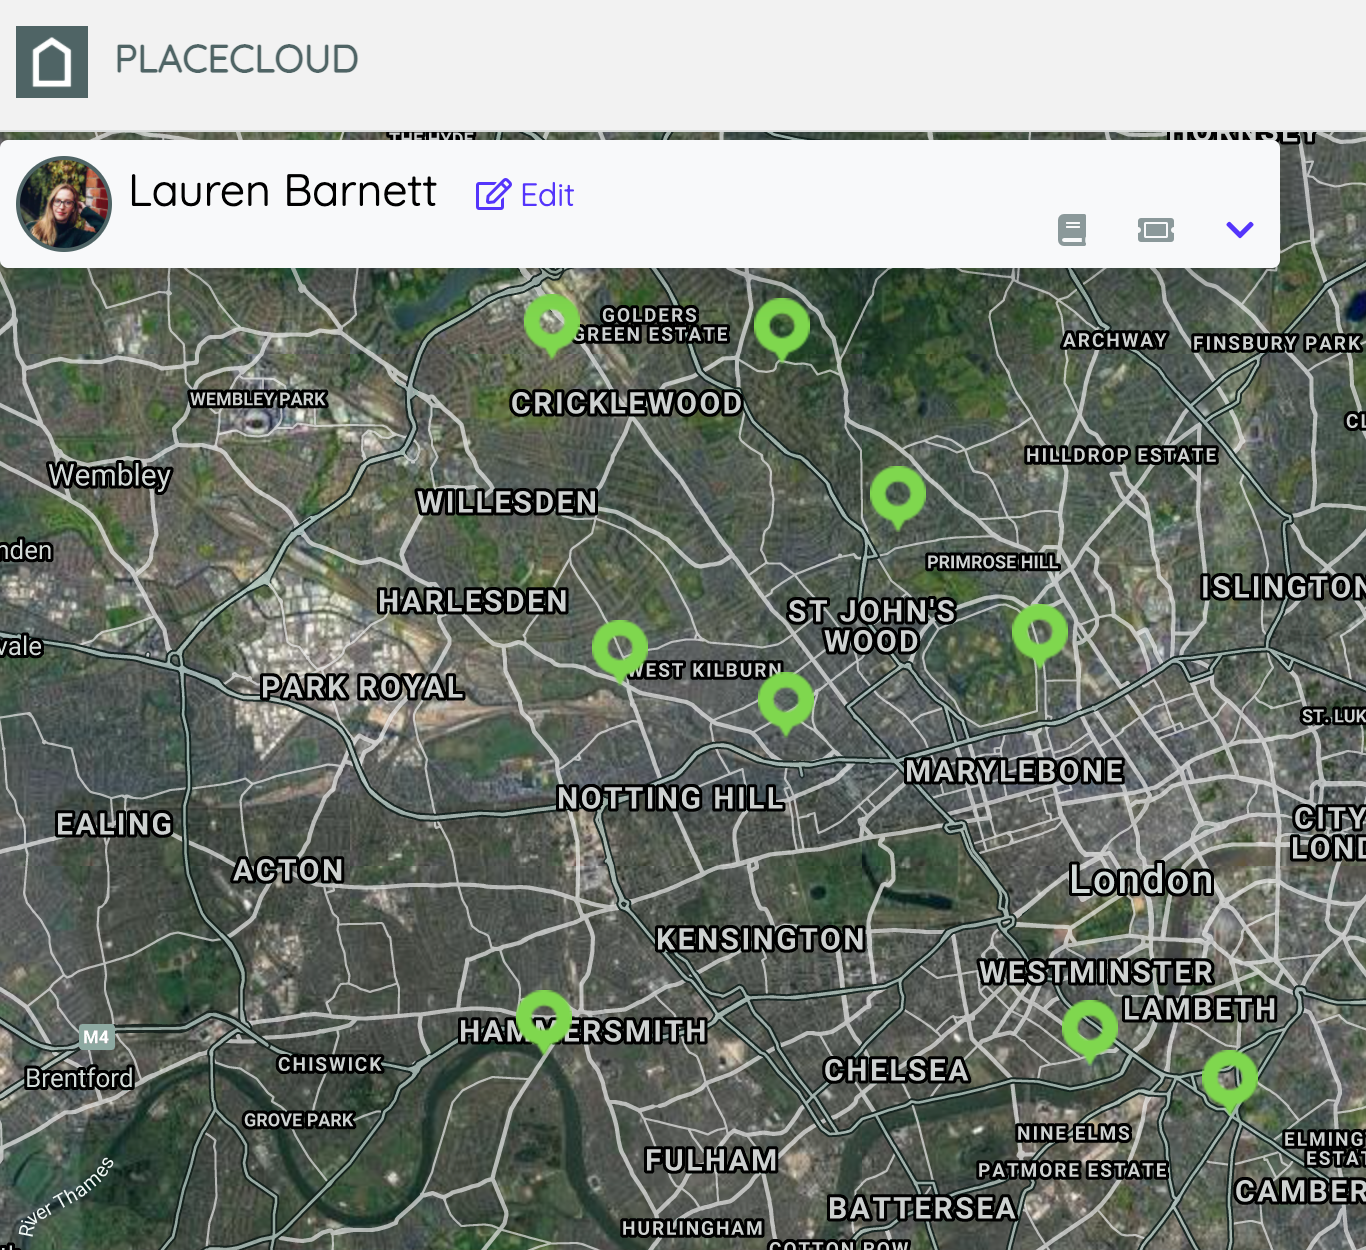 London Horror Locations are up on Placecloud!